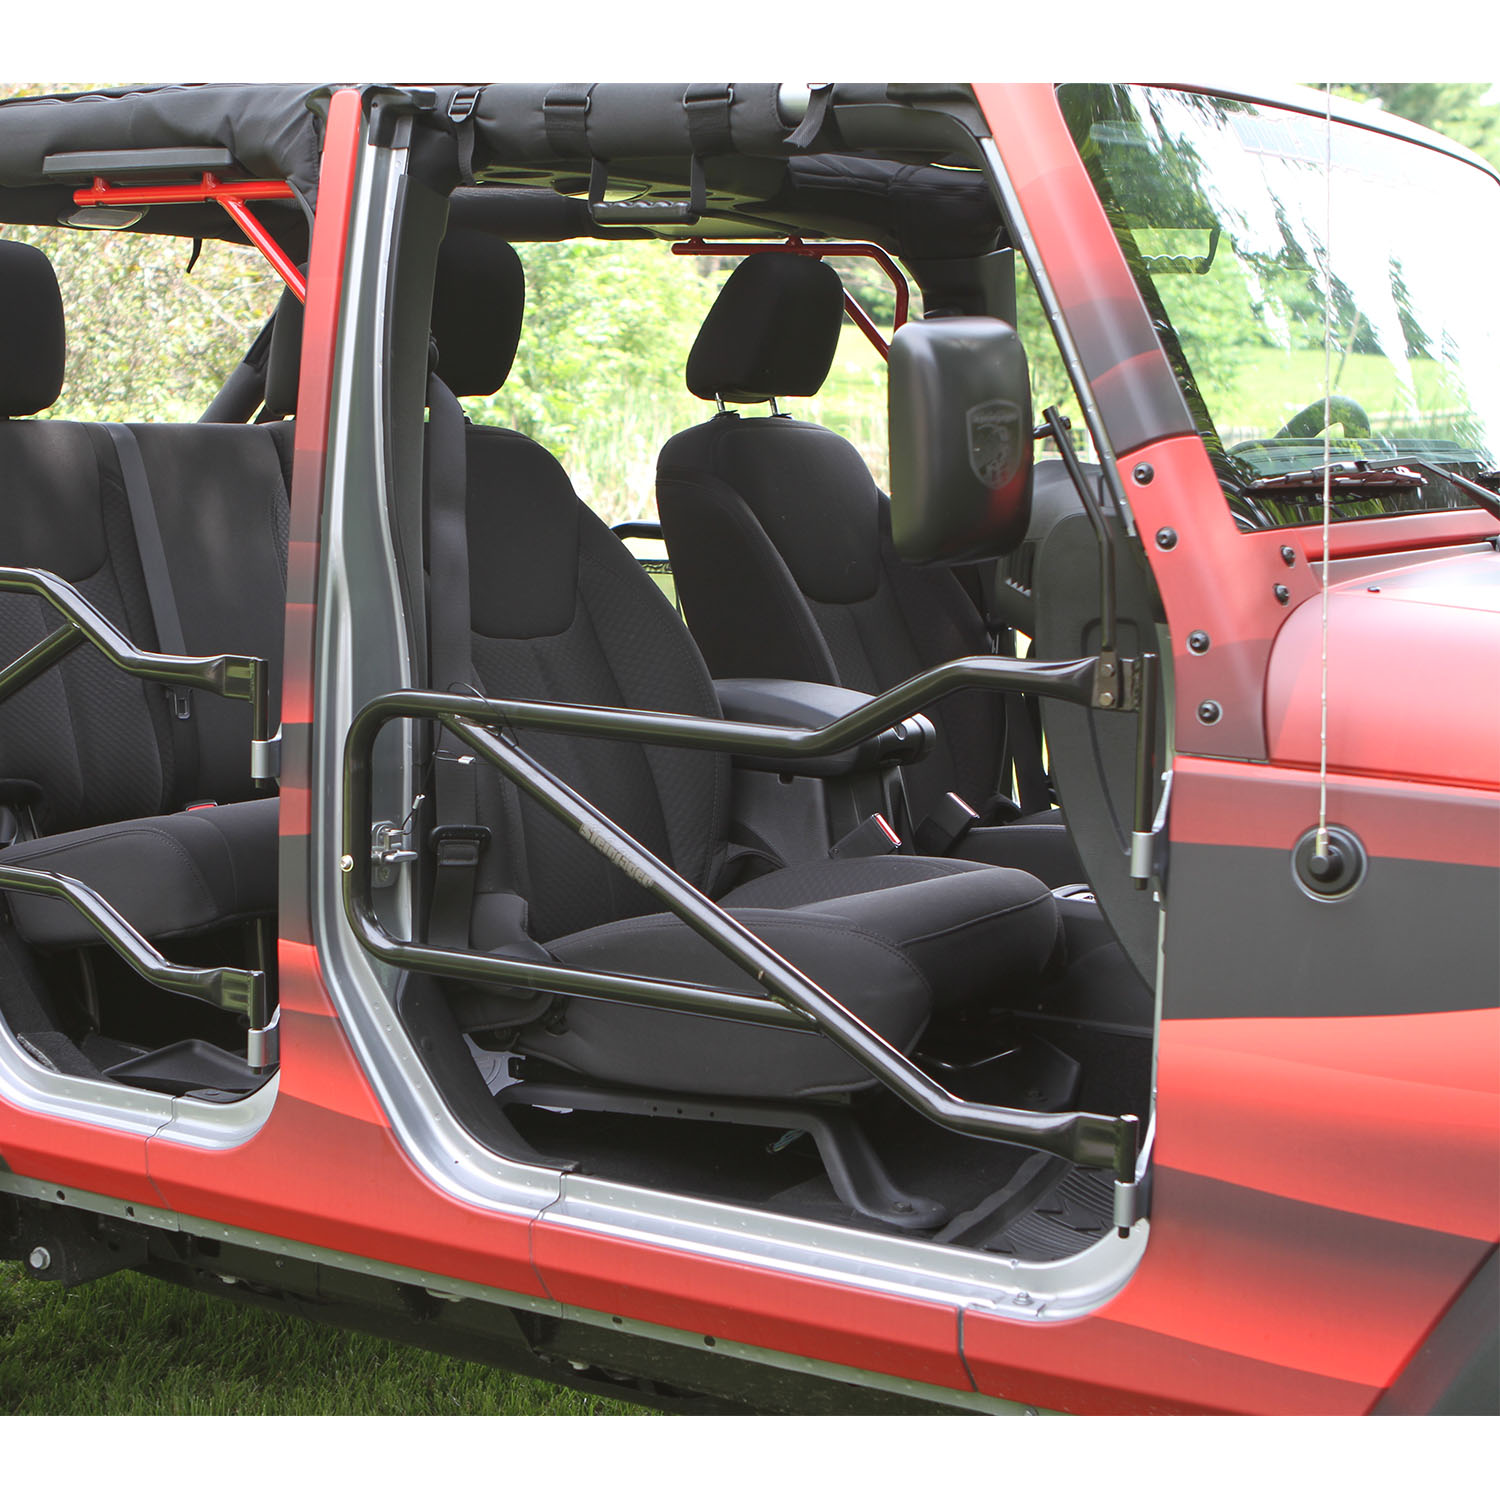 Jeep JK Wrangler Trail Door Kit Playboy Blue with White Covers